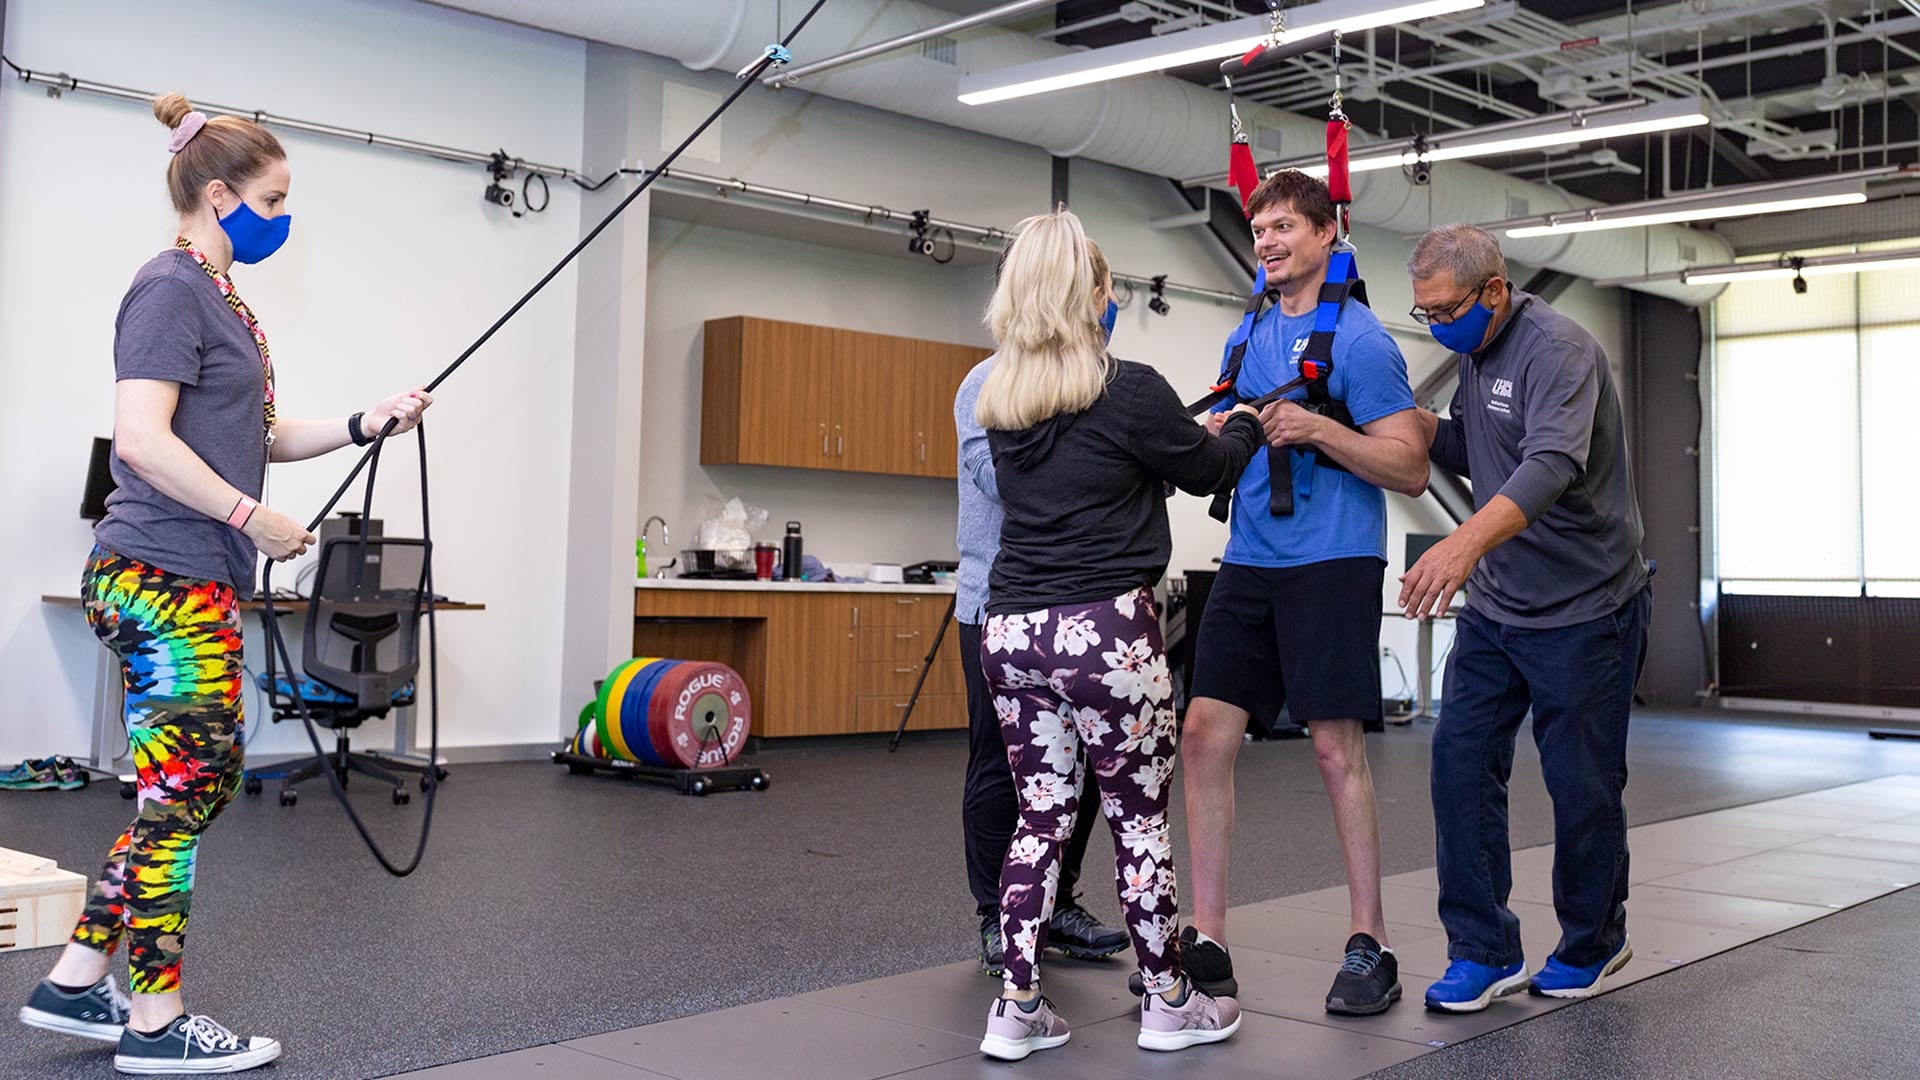 Sean Carter practices walking in a harness, supported on the right by HHPI Clinical Director Dr. Joe Hazzard, and guided by graduate students in UHCL's Exercise Sciences program.